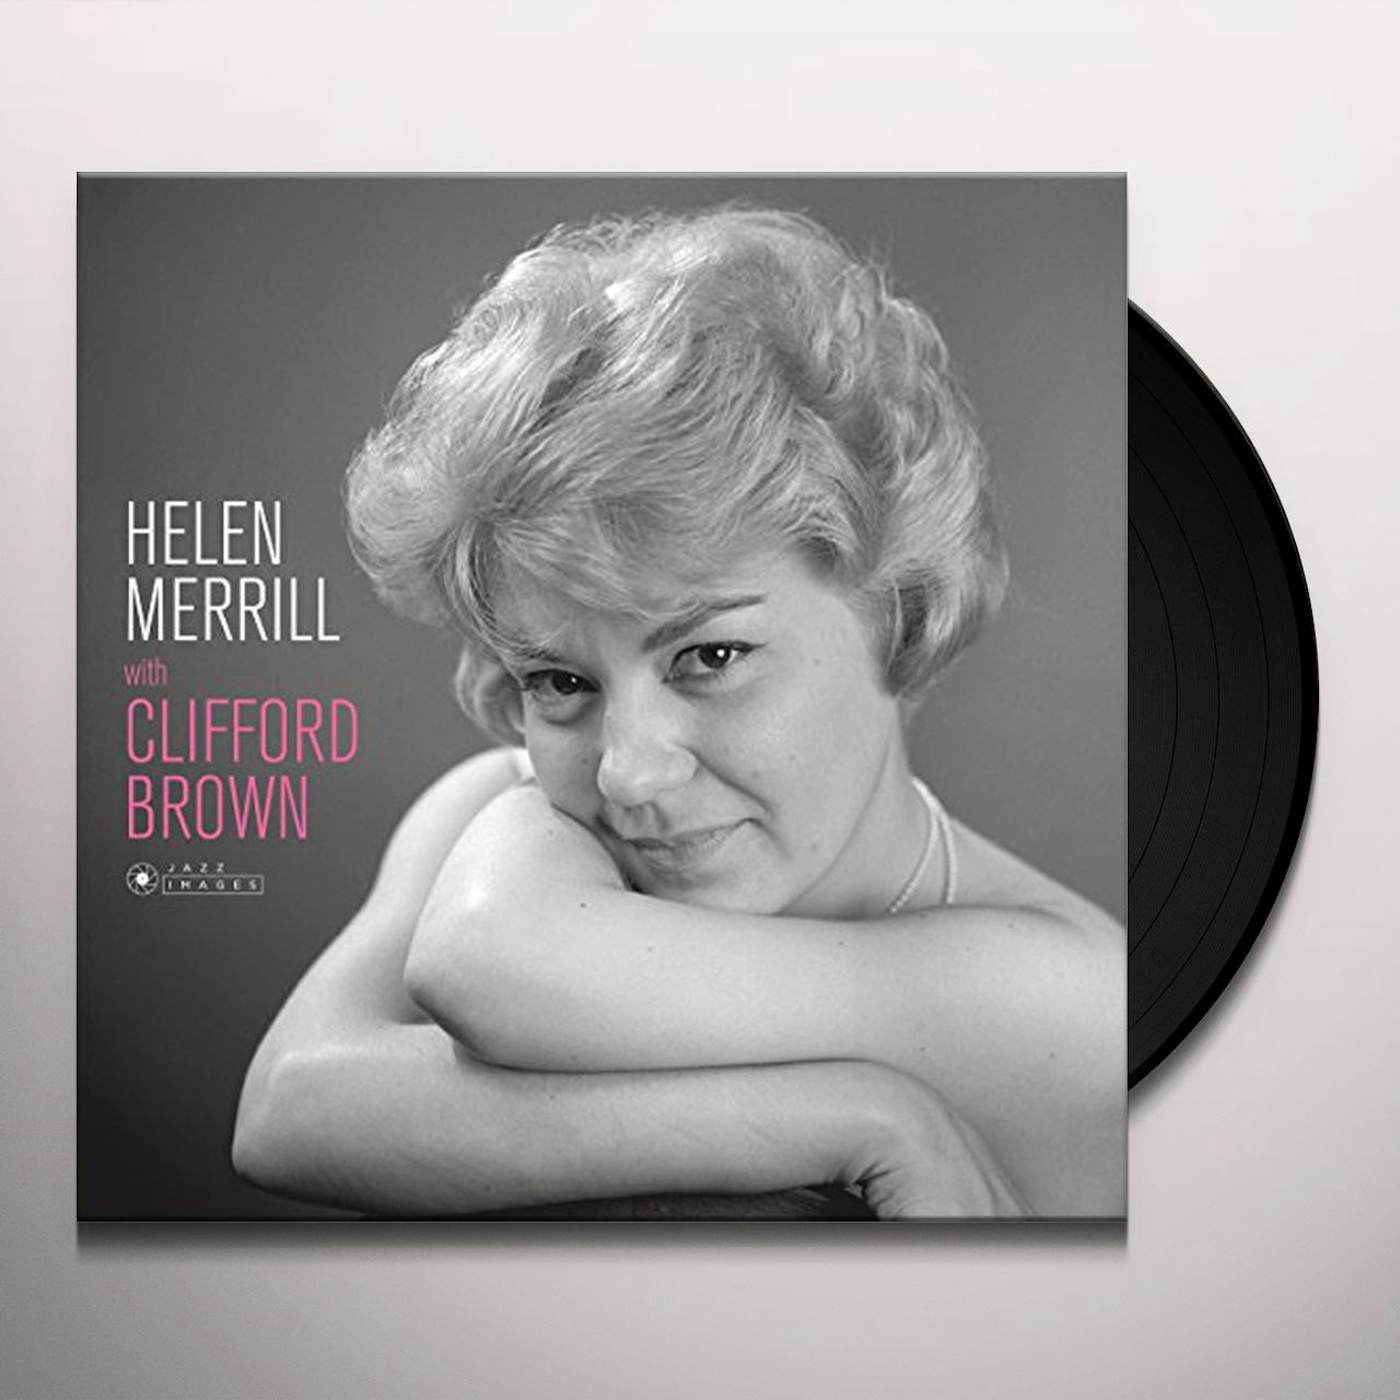 HELEN MERRILL WITH CLIFFORD BROWN (COVER PHOTO BY JEAN-PIERRE LELOIR/GATEFOLD 180G EDITION) Vinyl Record